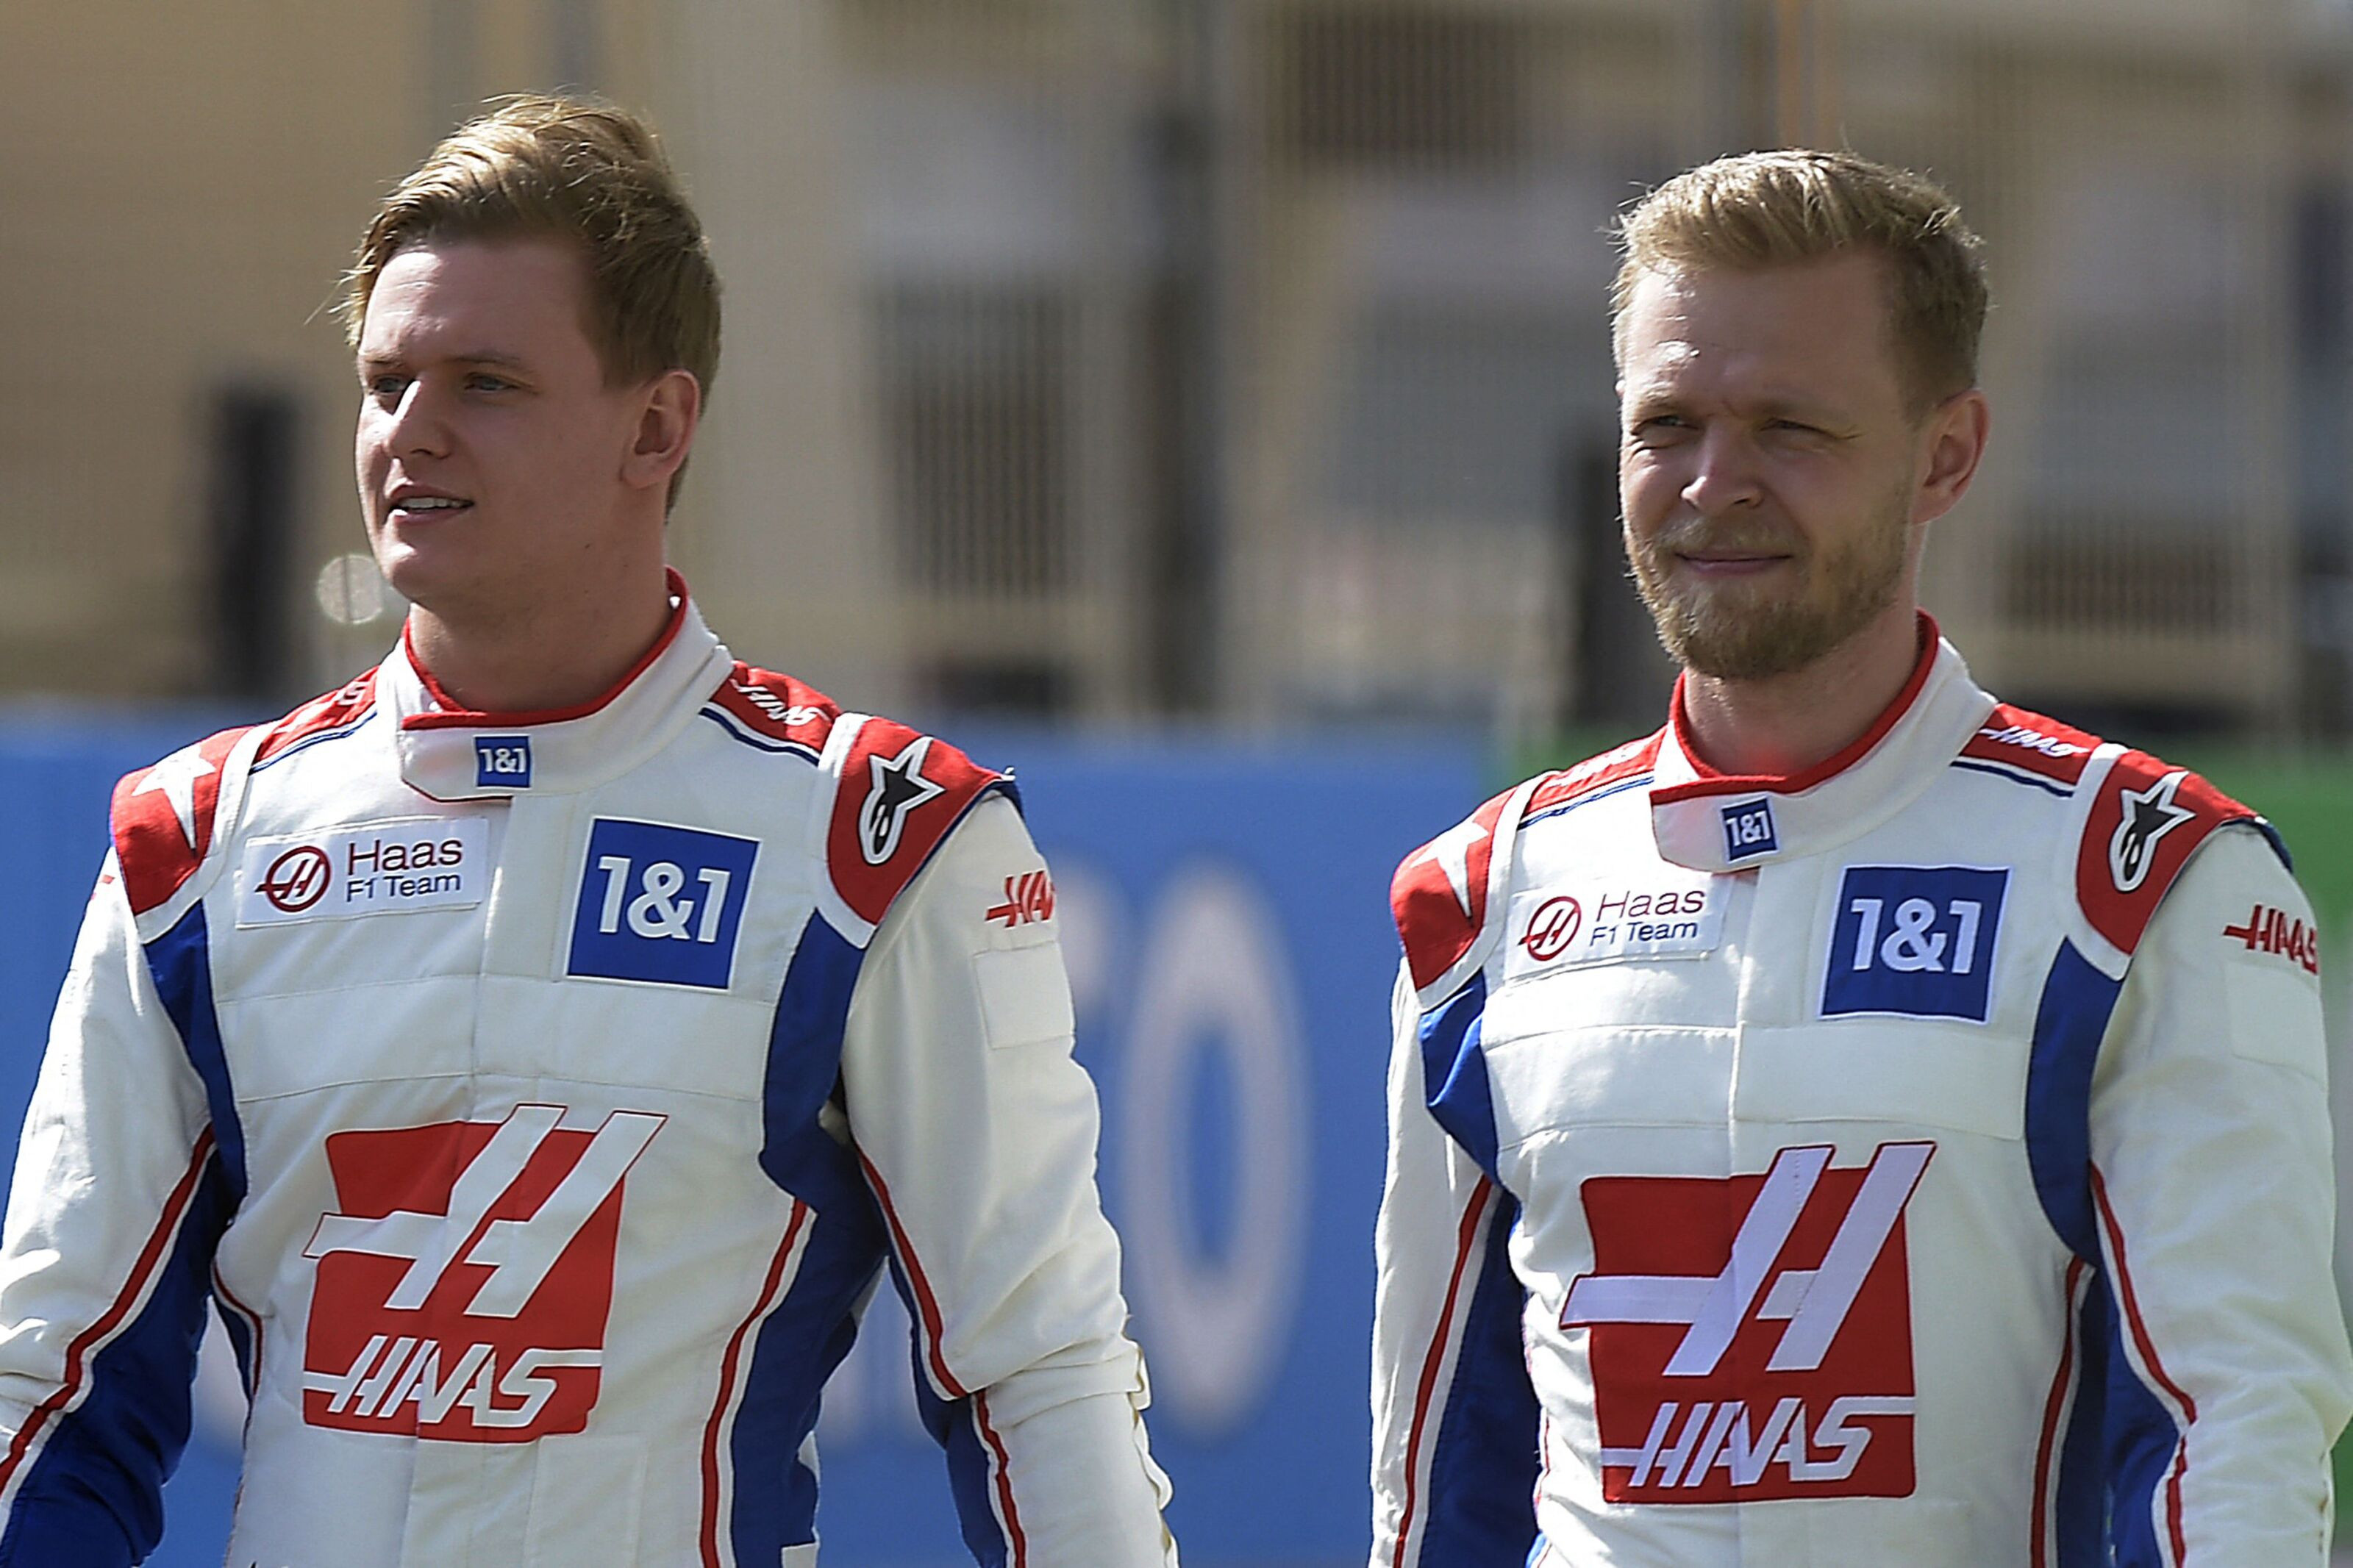 Photo of Mick Schumacher deserves to stay in F1: Magnussen